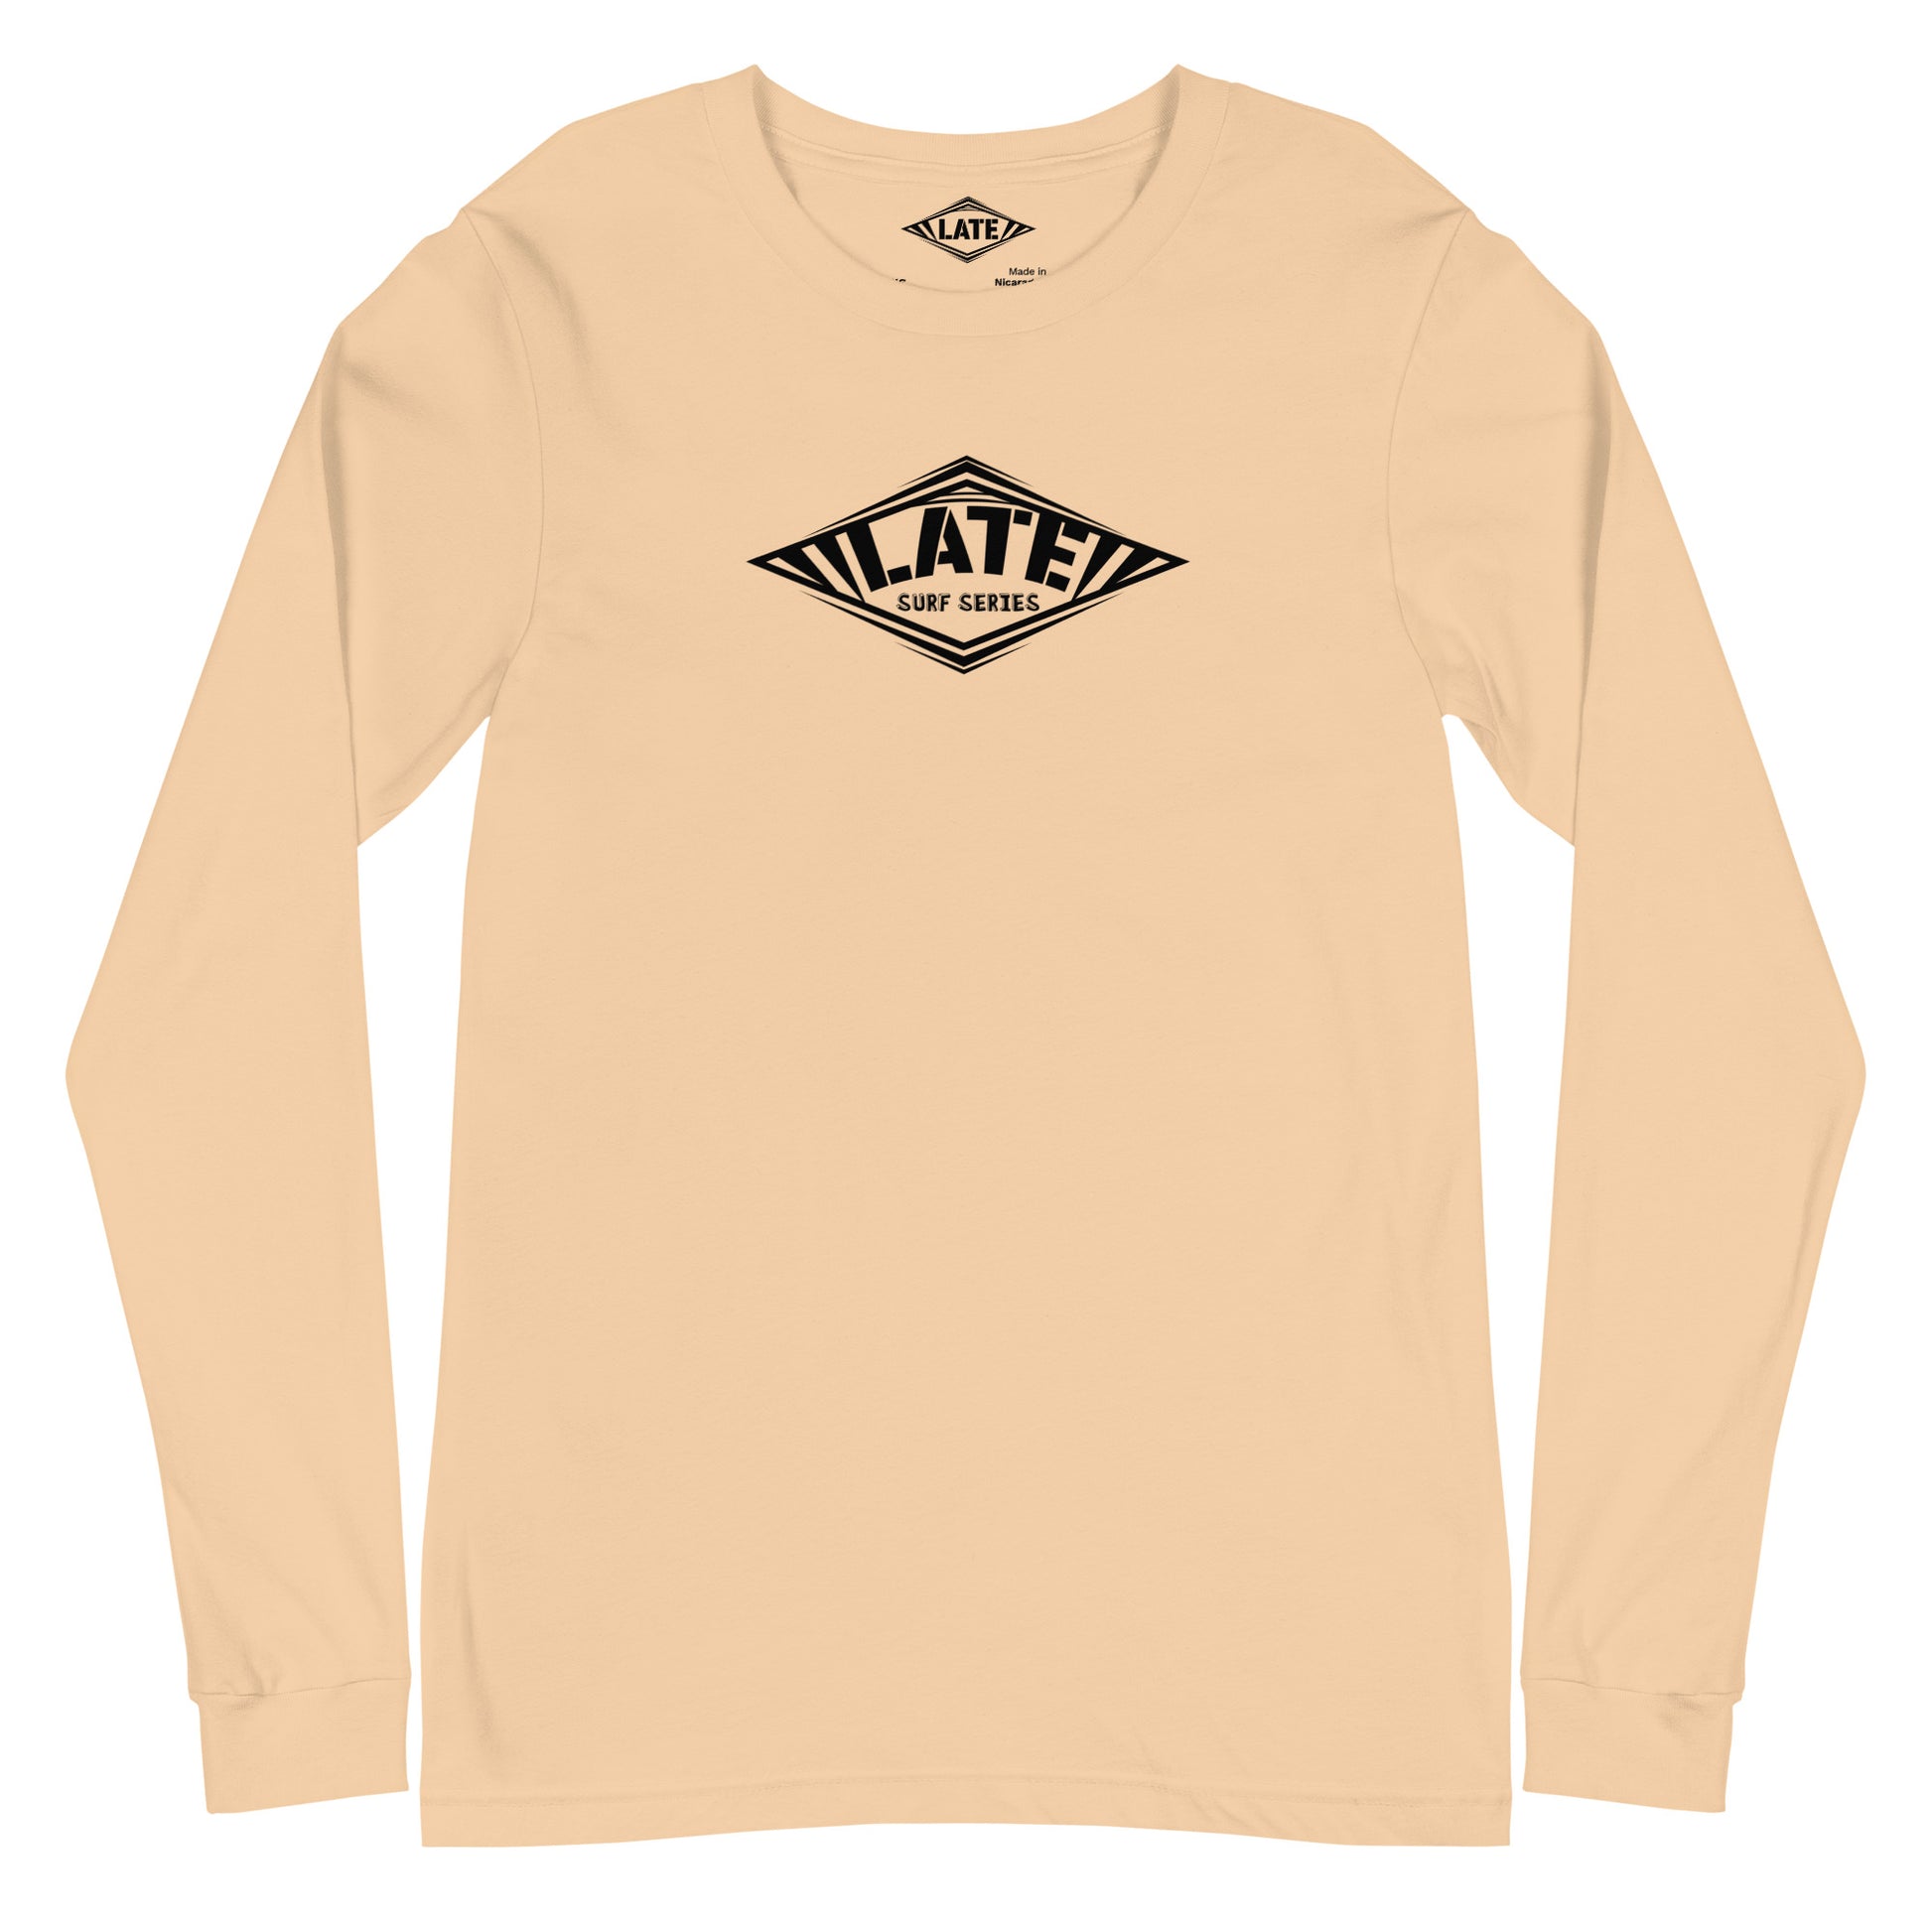 Long Sleeve Surf series Take On The Elements logo Late, unisex, face, couleur sable